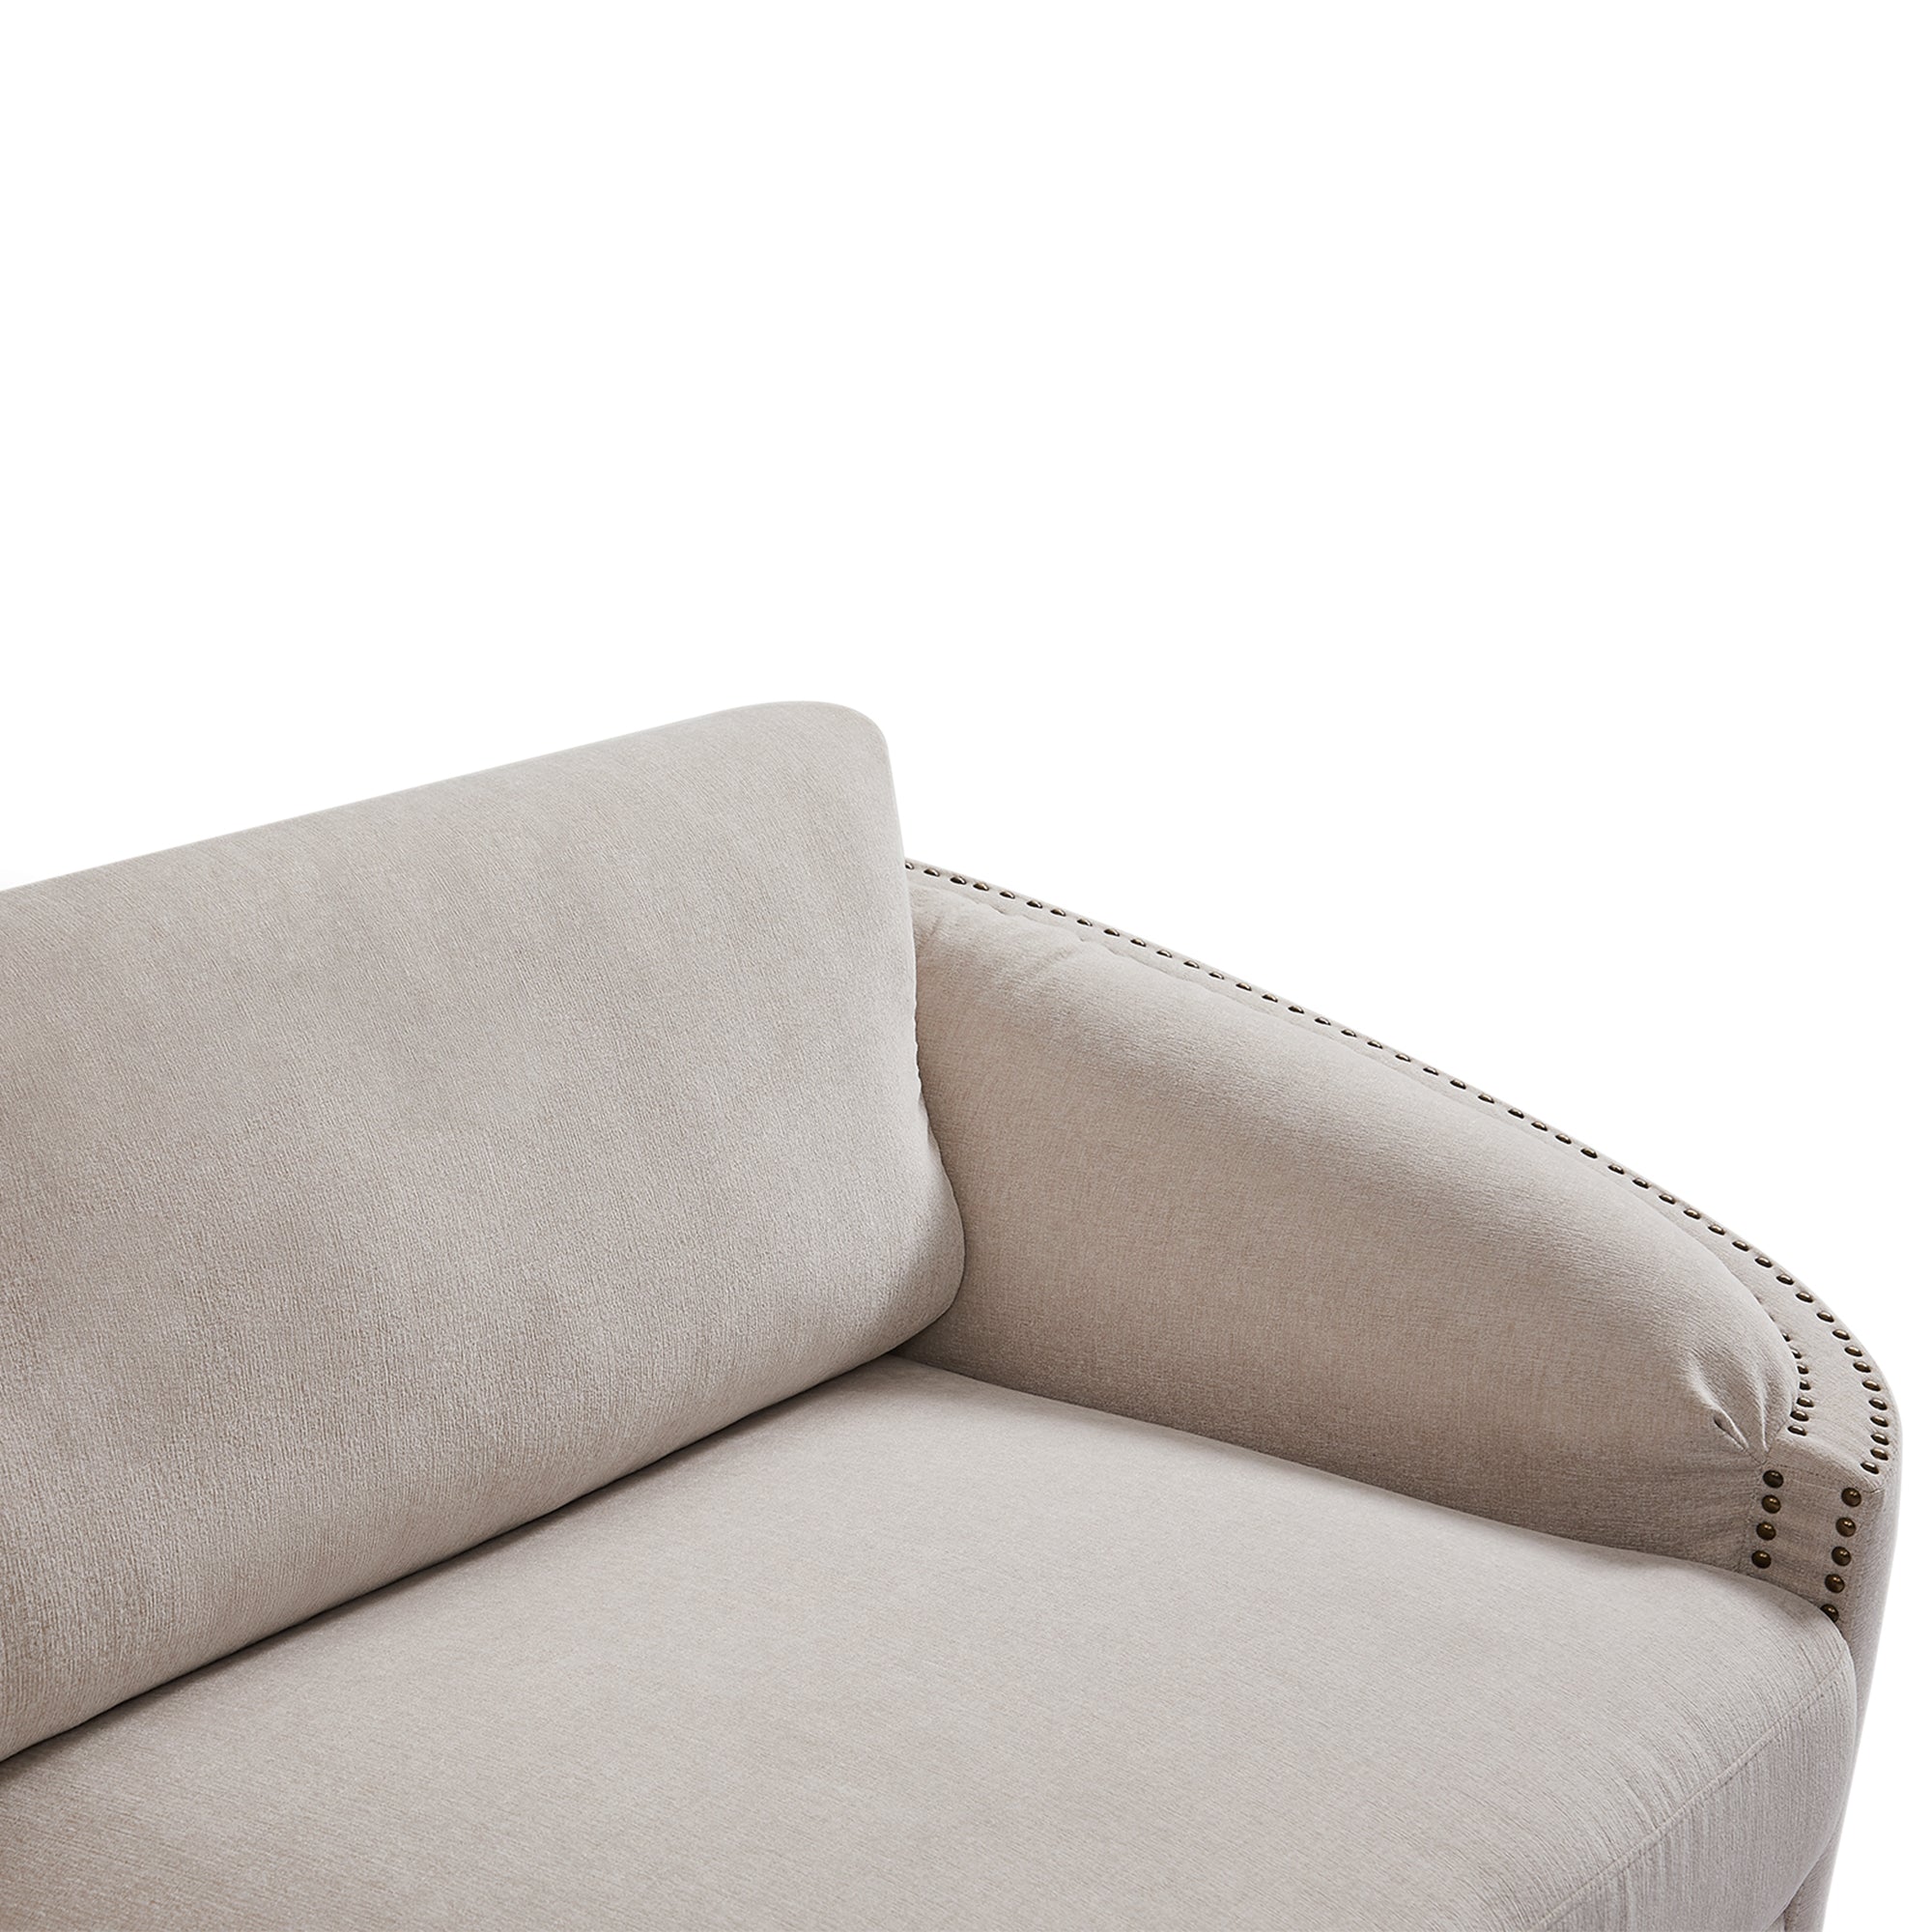 Stylish Sofa with Semilunar Arm, Rivet Detailing, and Solid Frame -  Beige